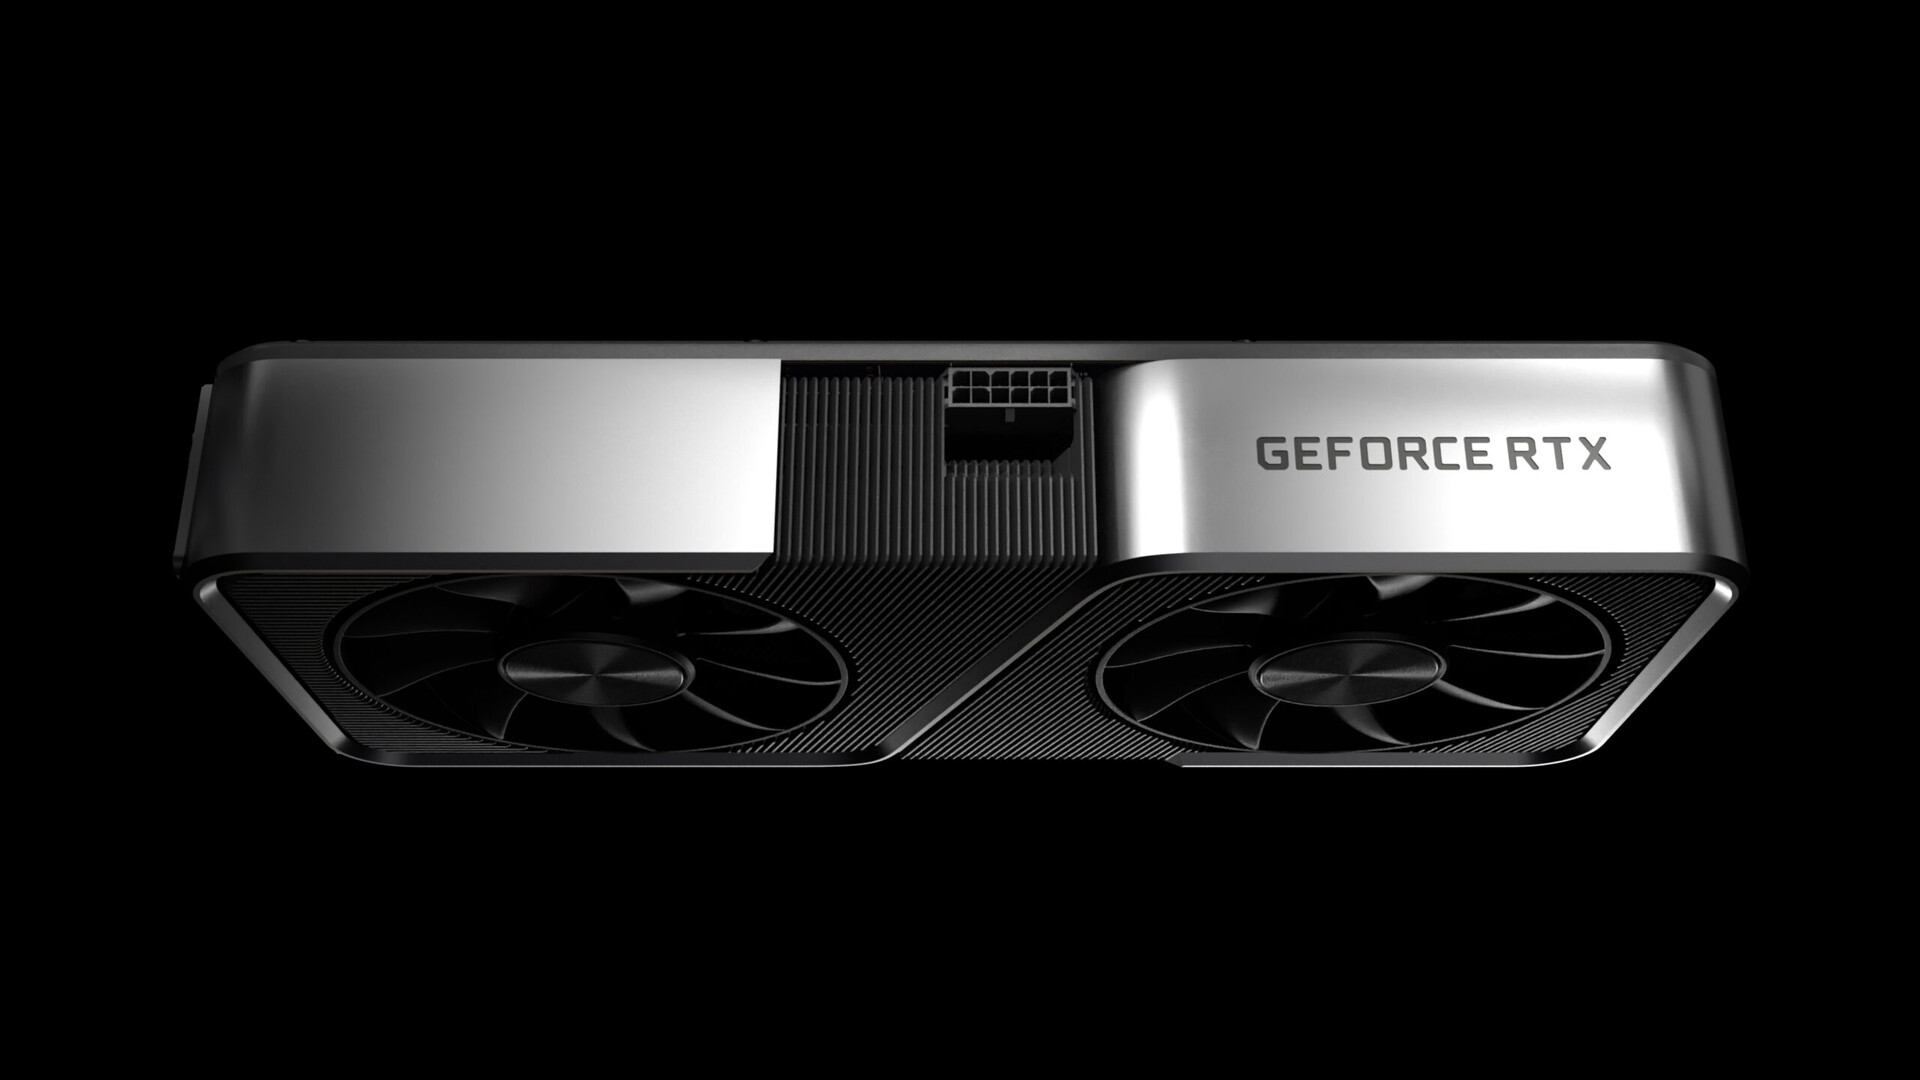 NVIDIA GeForce RTX 3080 Ti Leakage Takes Your GA102 Card to the Same as the GeForce RTX 3090